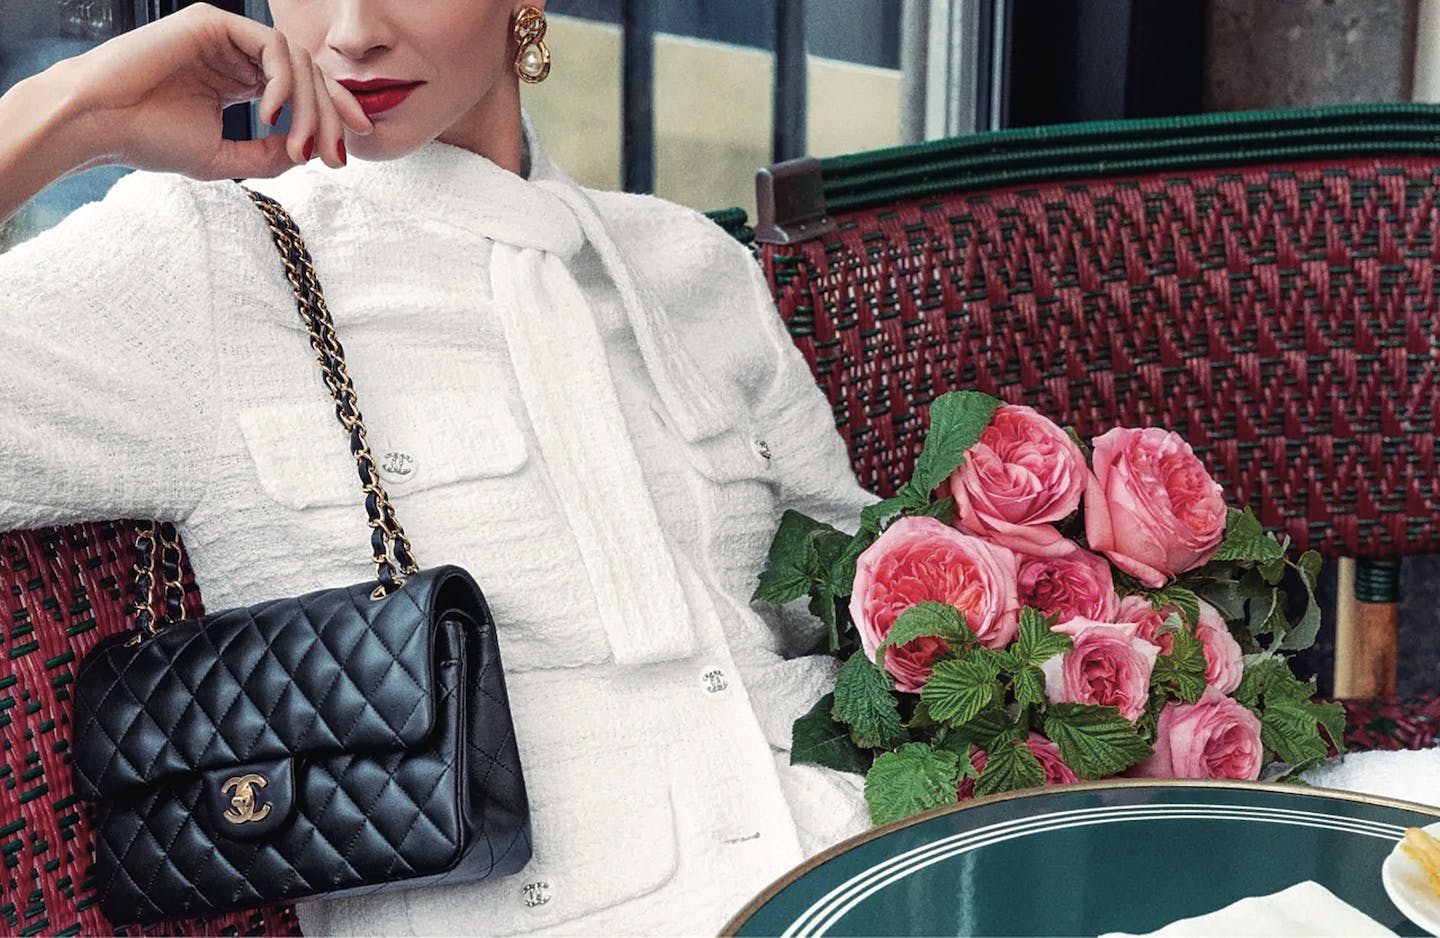 From CHANEL to Hermès: Are luxury bags really a good investment?